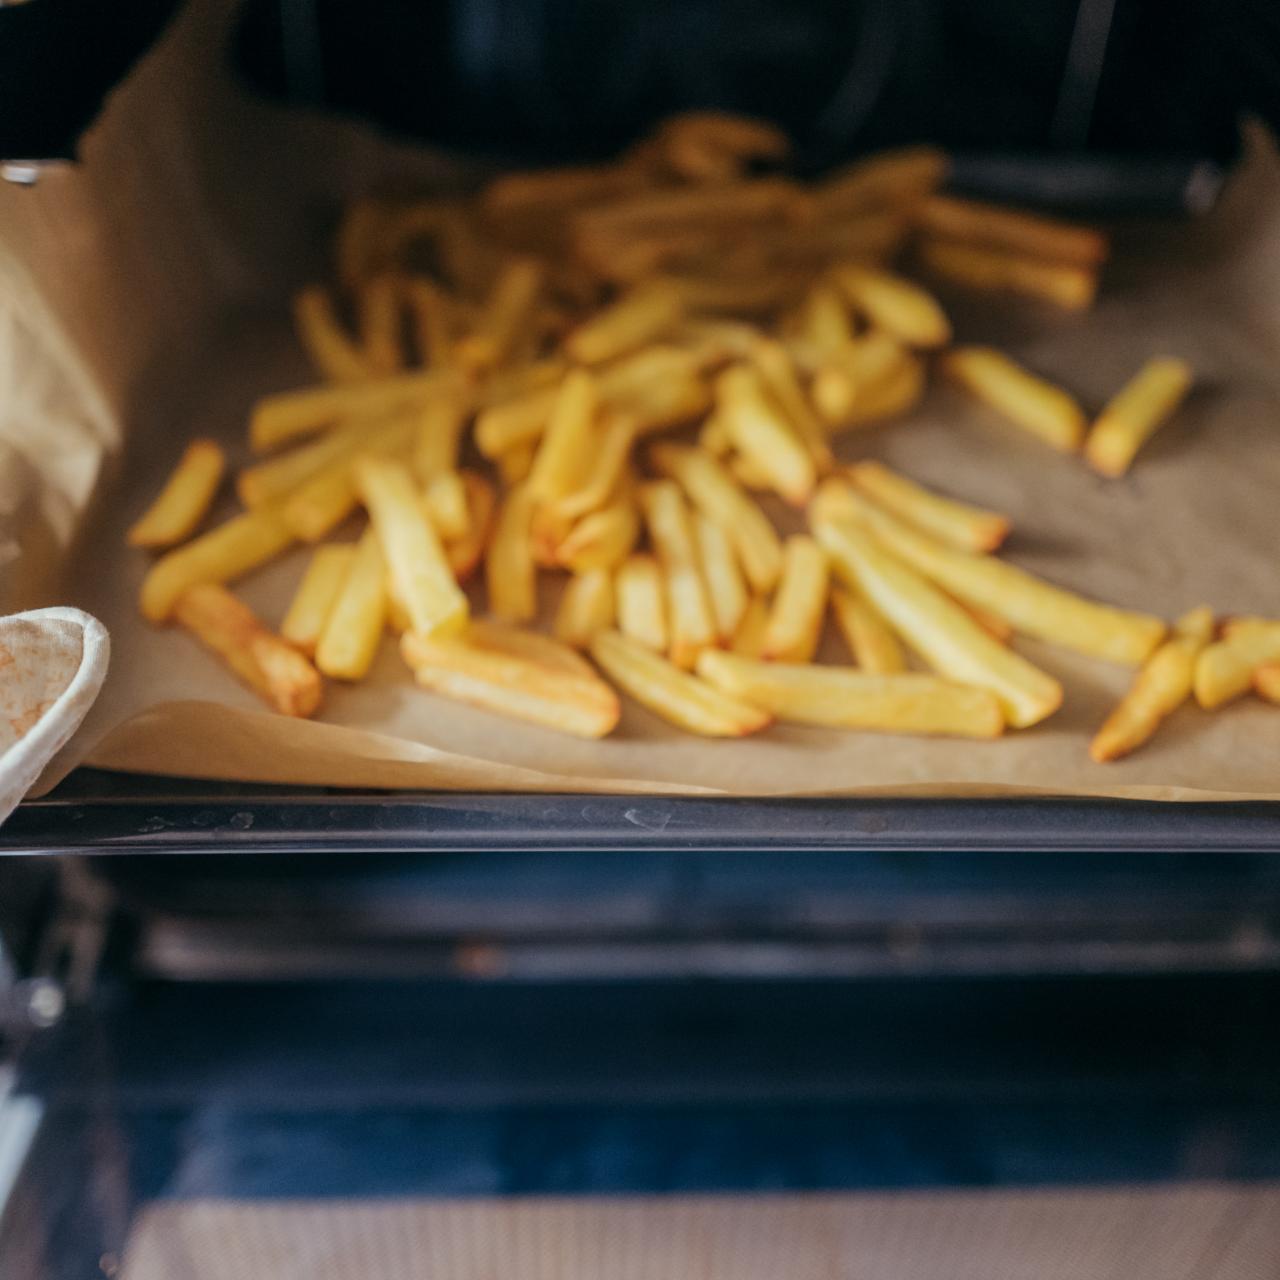 We Tried 14 Frozen French Fries. Here's The Best One To Buy 